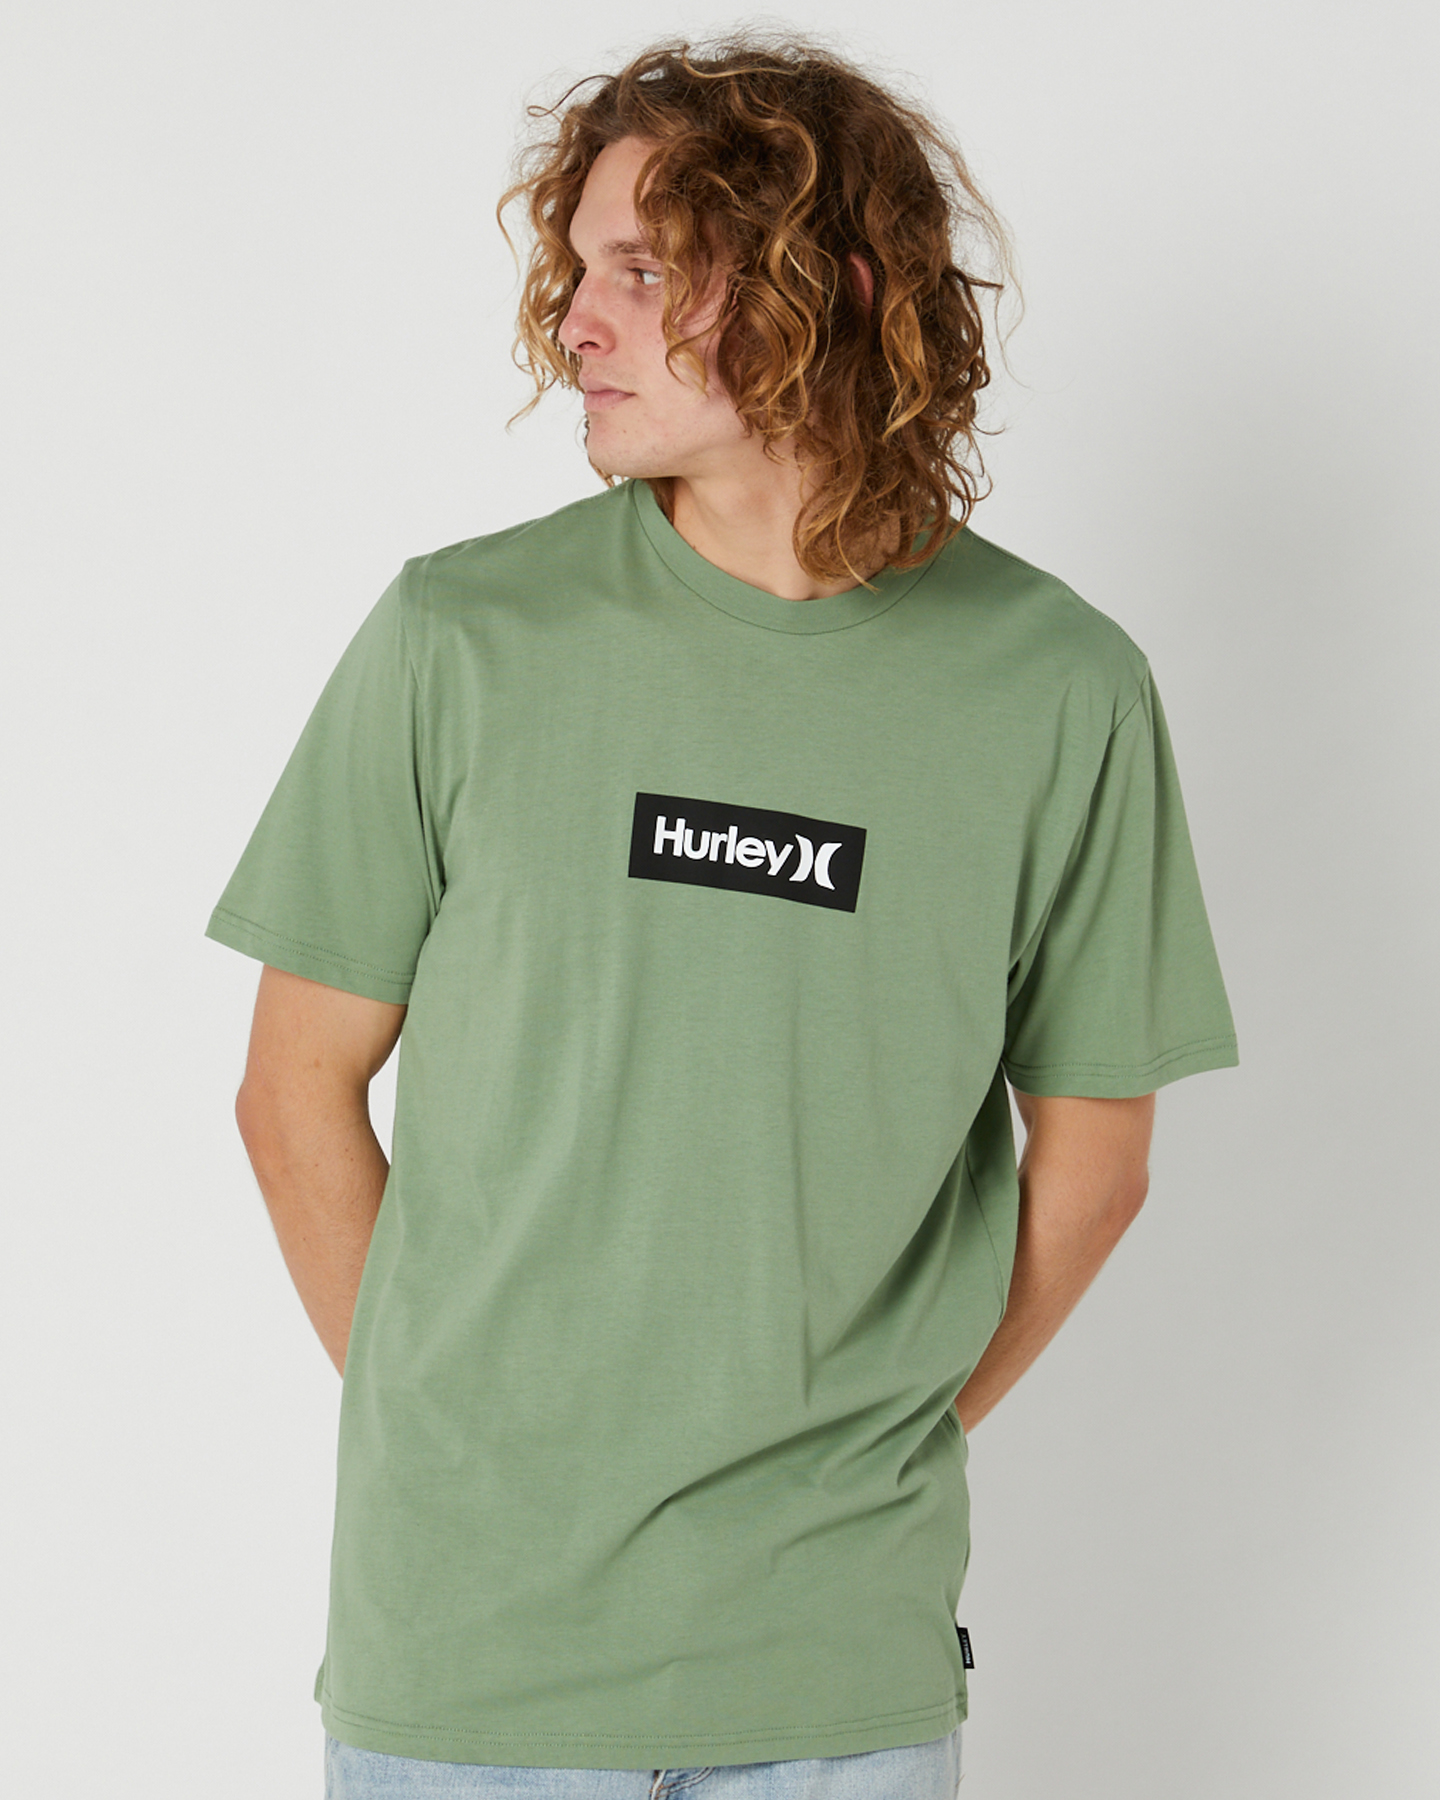 Hurley Box Only Ss Tee - Loden Frost | SurfStitch